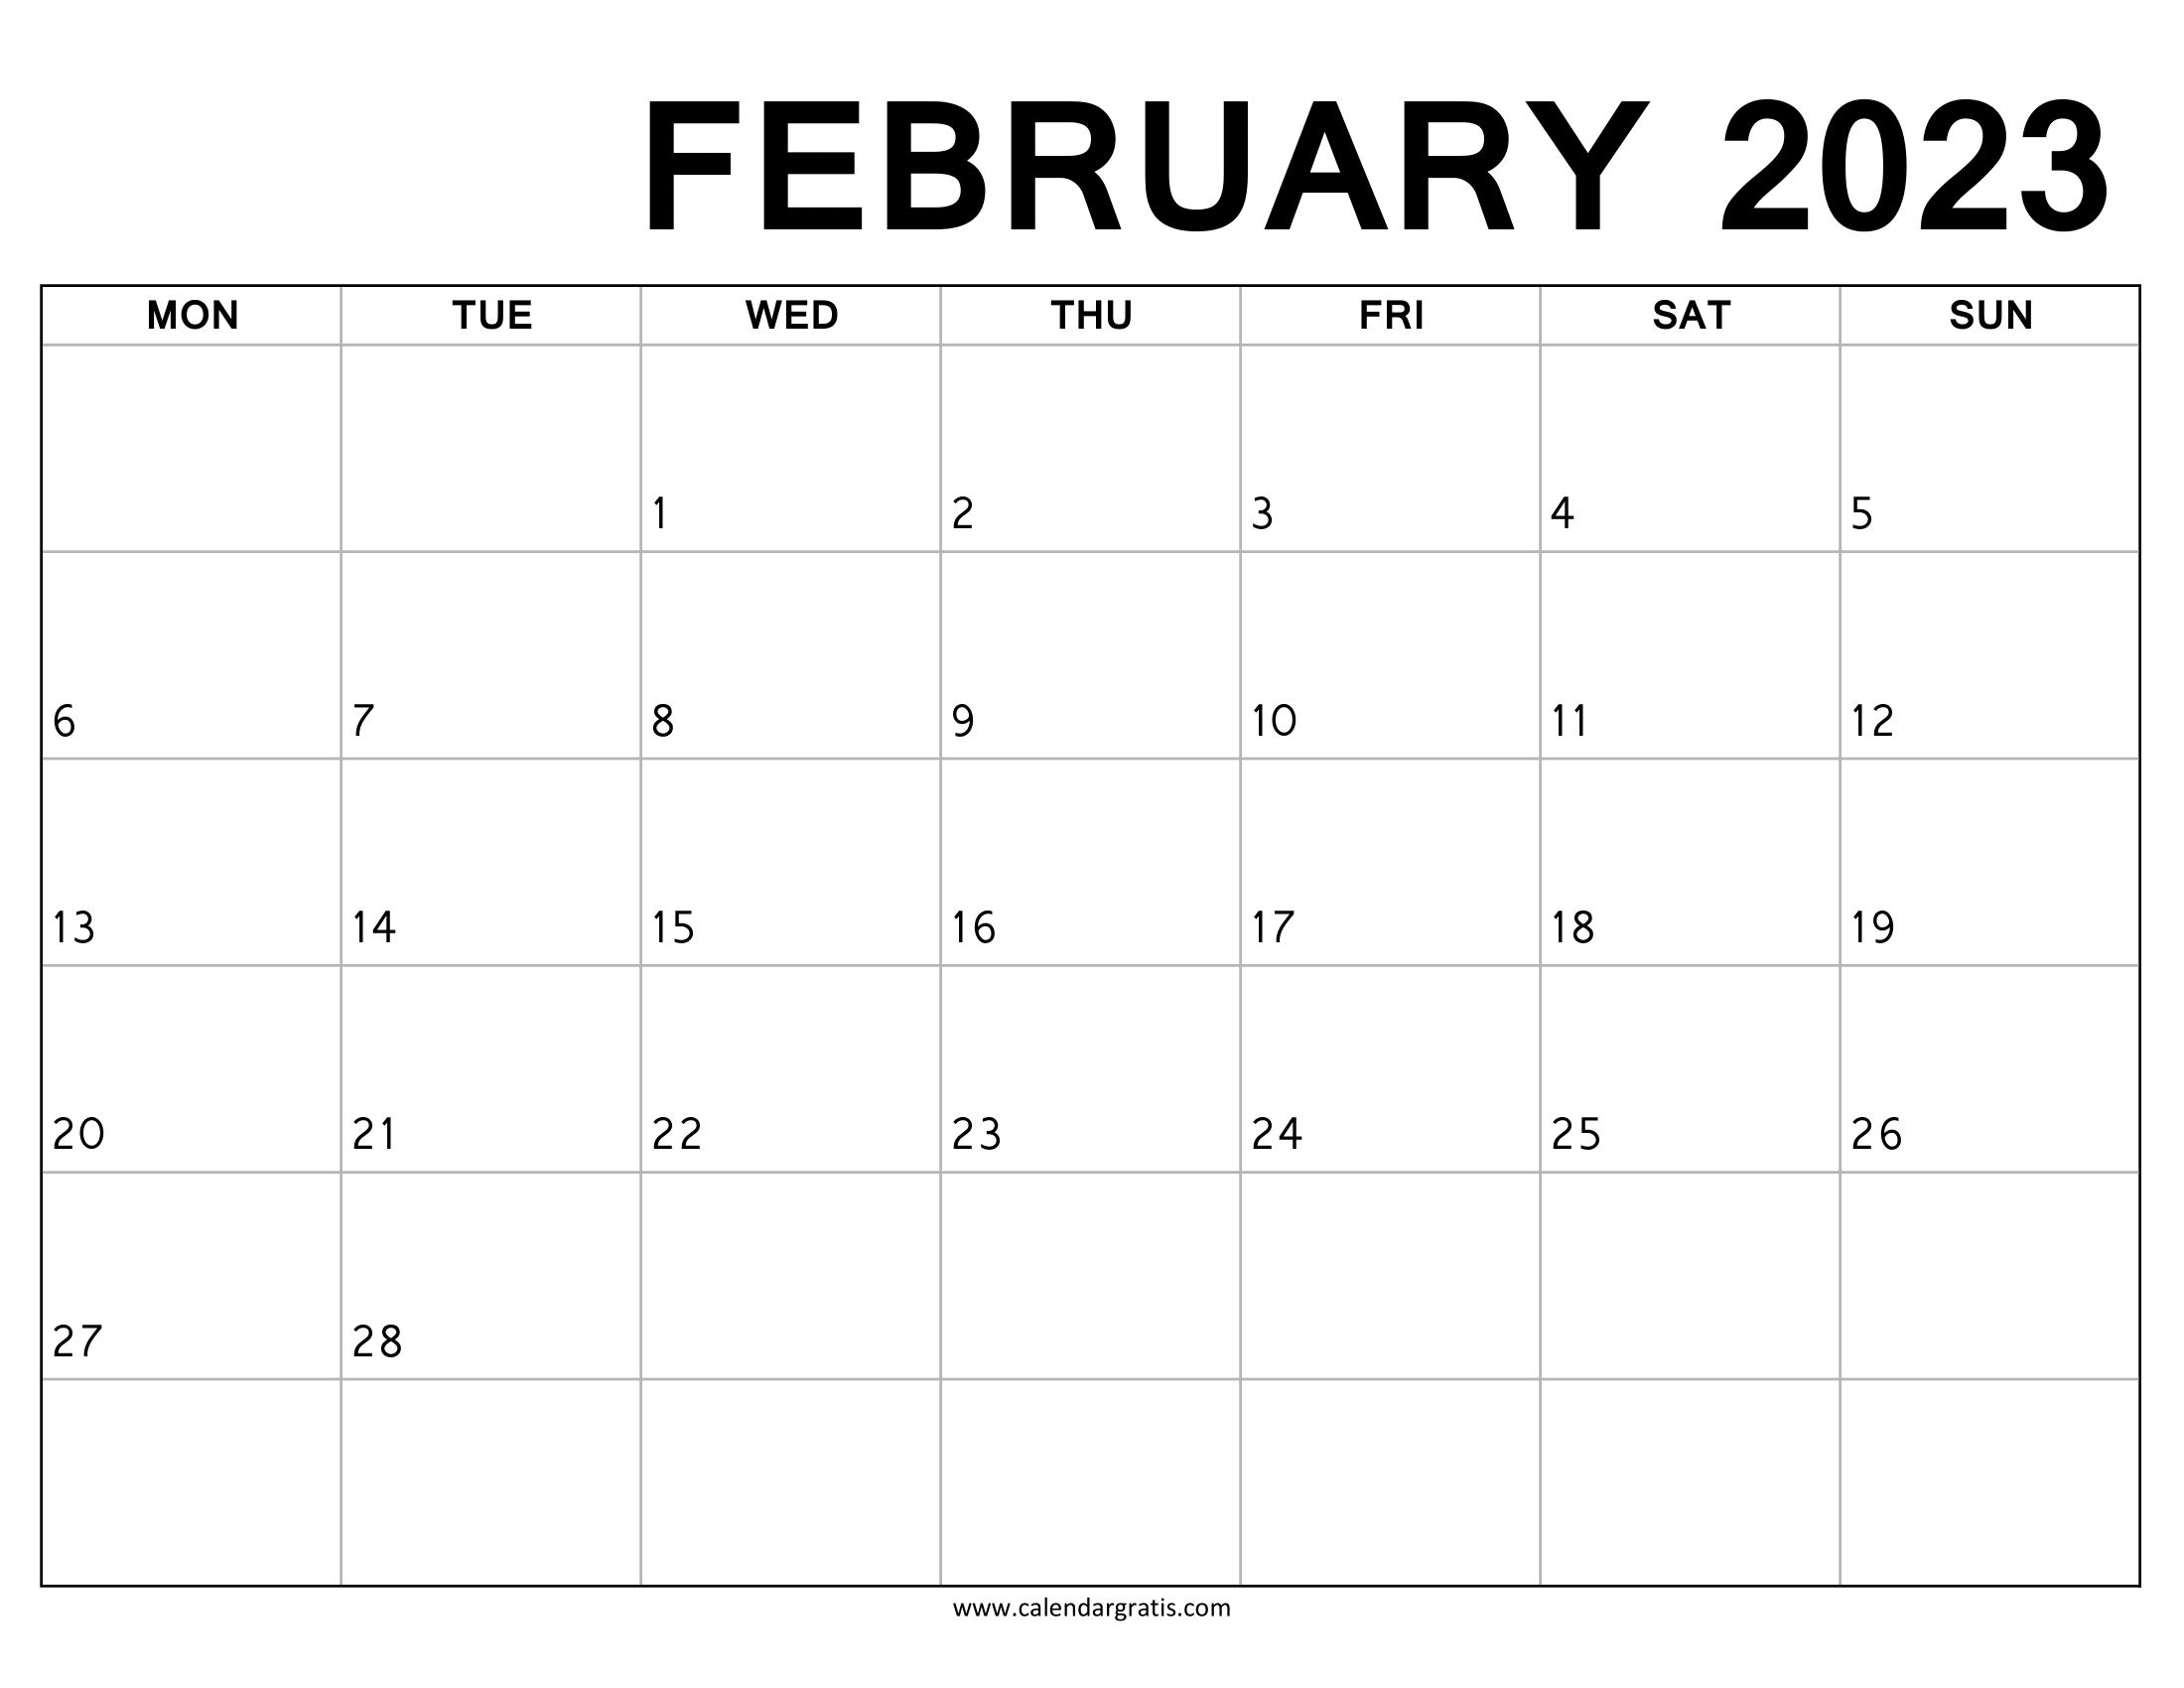 Download February 2023 Calendar Printable Monday Start, Monday to Sunday, Black and White Monthly Calendar Template.